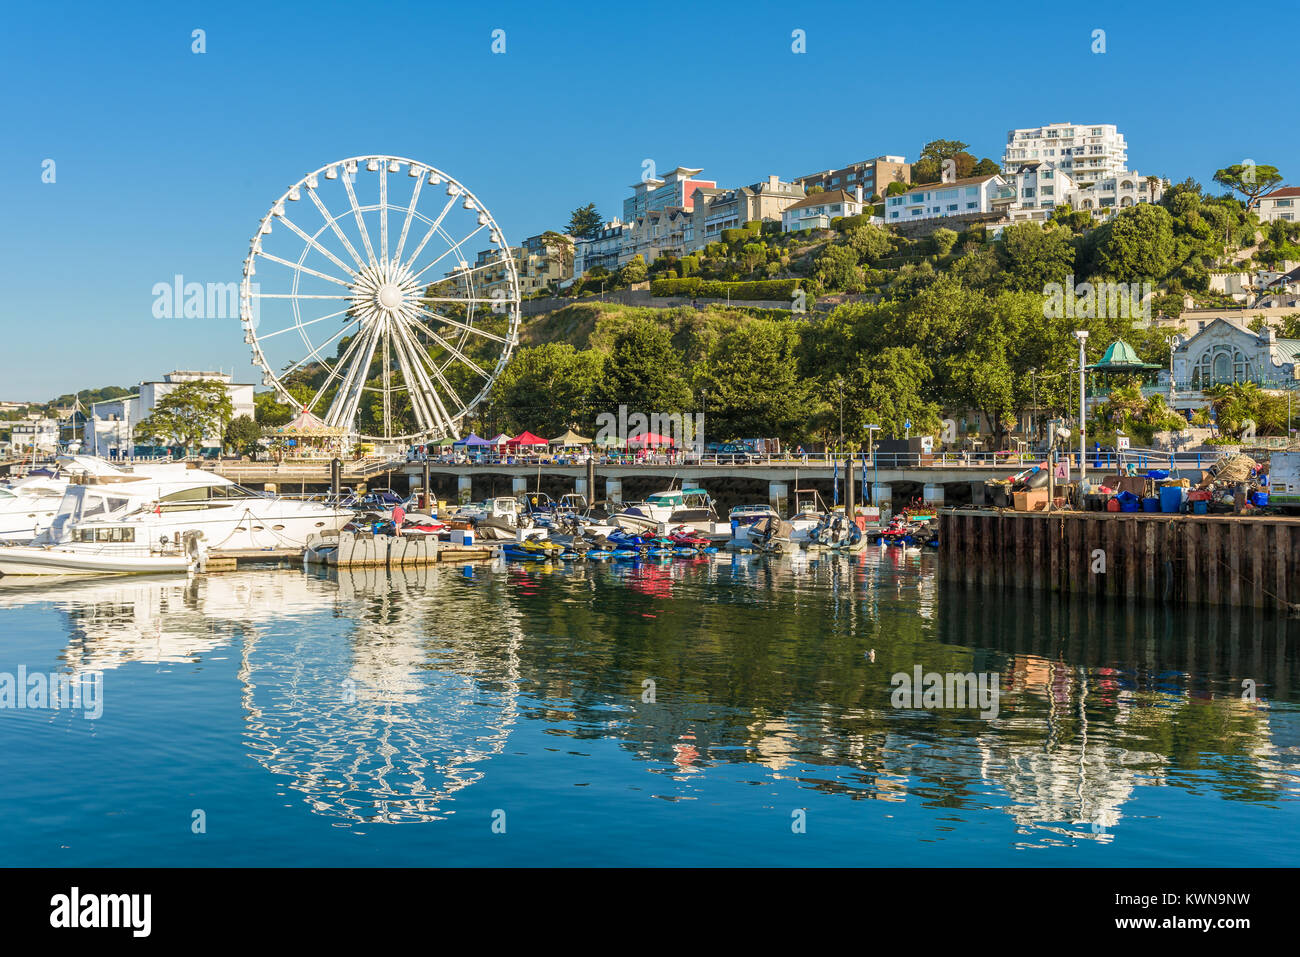 Morning view of Torquay from the Harbour, Devon, England. August 2017 Stock Photo